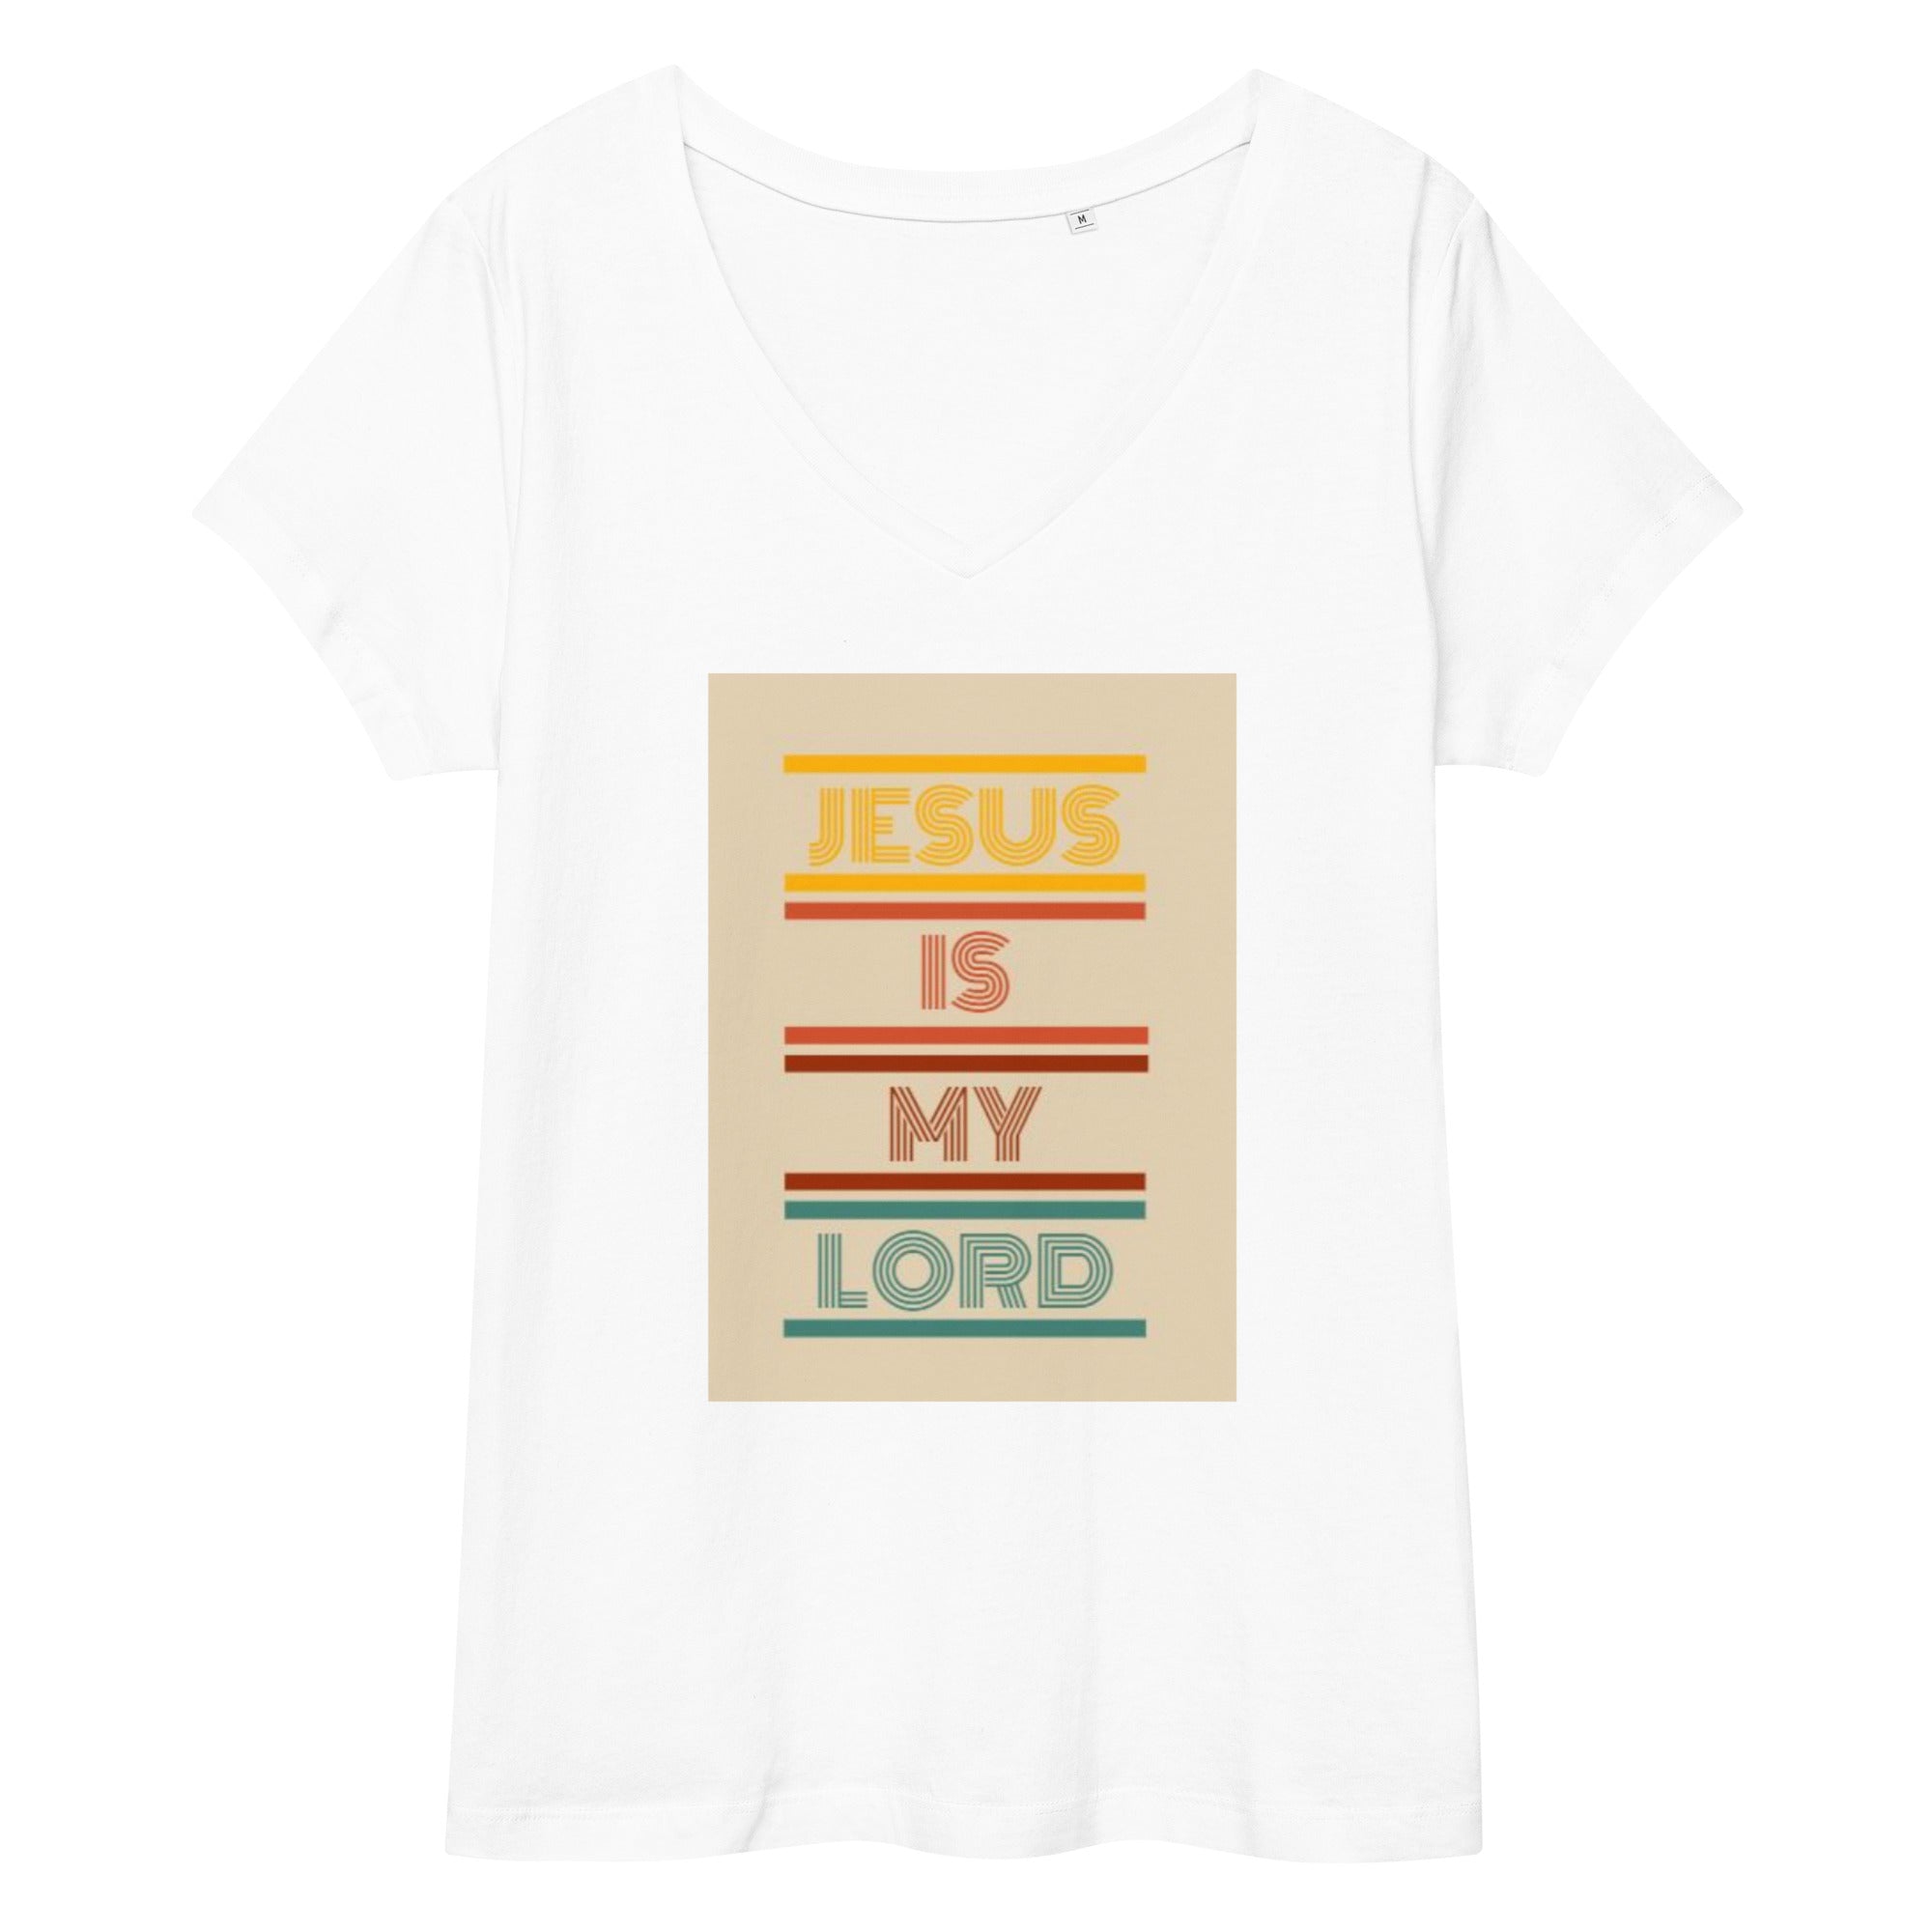 Jesus is my Lord - Women’s fitted v-neck t-shirt